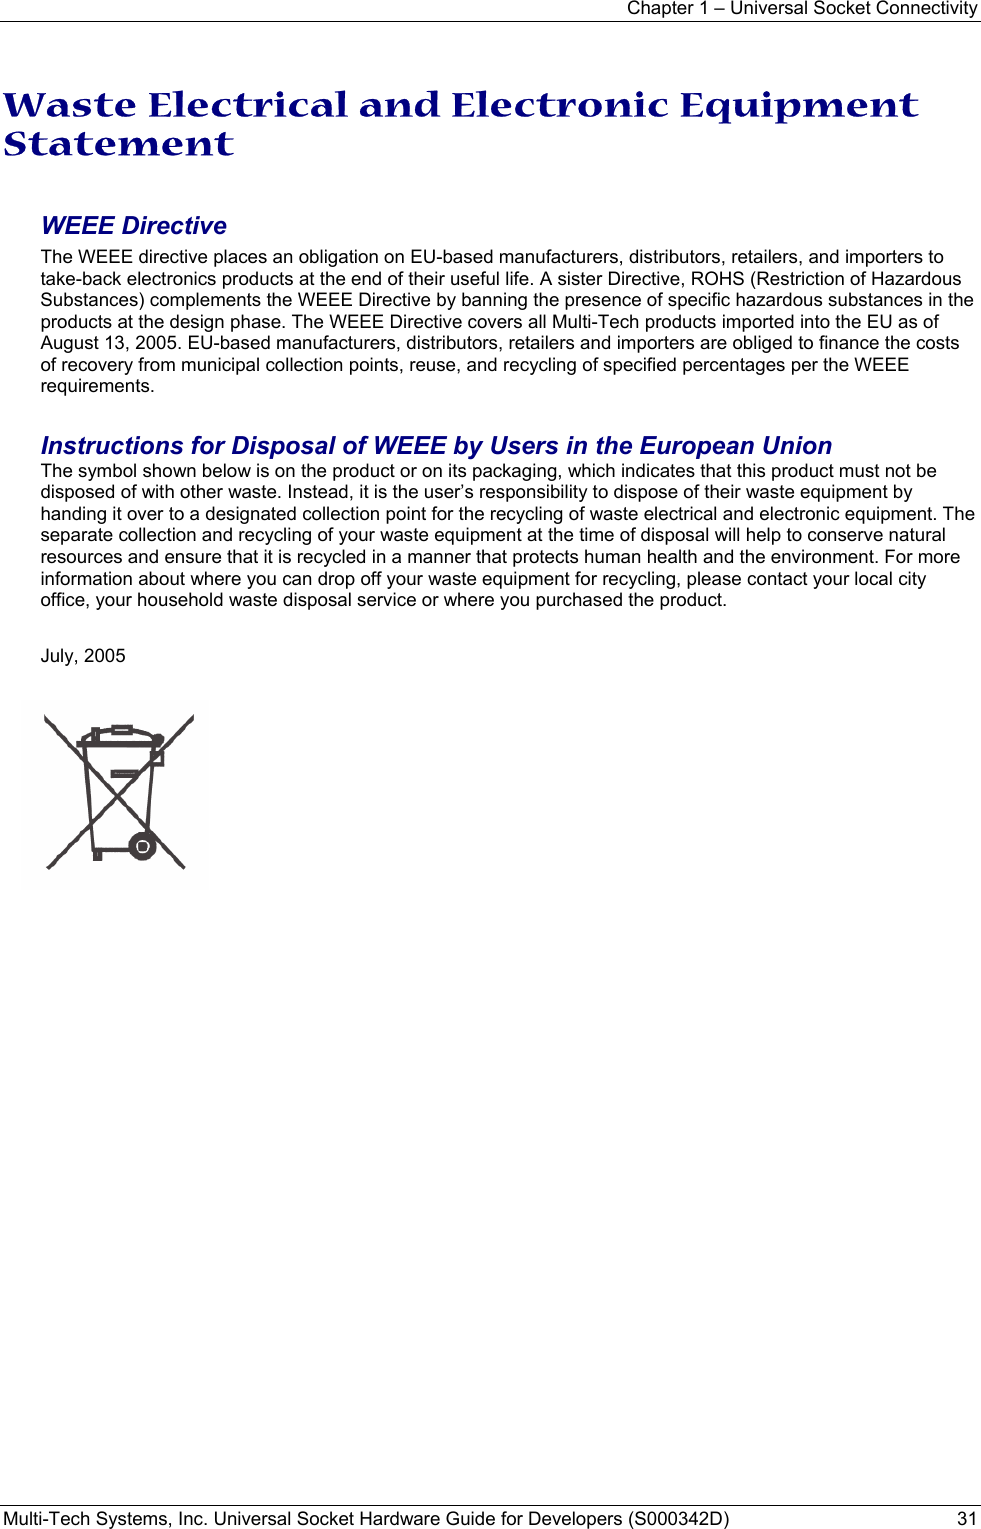 Chapter 1 – Universal Socket Connectivity Multi-Tech Systems, Inc. Universal Socket Hardware Guide for Developers (S000342D)  31  Waste Electrical and Electronic Equipment Statement  WEEE Directive The WEEE directive places an obligation on EU-based manufacturers, distributors, retailers, and importers to take-back electronics products at the end of their useful life. A sister Directive, ROHS (Restriction of Hazardous Substances) complements the WEEE Directive by banning the presence of specific hazardous substances in the products at the design phase. The WEEE Directive covers all Multi-Tech products imported into the EU as of August 13, 2005. EU-based manufacturers, distributors, retailers and importers are obliged to finance the costs of recovery from municipal collection points, reuse, and recycling of specified percentages per the WEEE requirements.  Instructions for Disposal of WEEE by Users in the European Union The symbol shown below is on the product or on its packaging, which indicates that this product must not be disposed of with other waste. Instead, it is the user’s responsibility to dispose of their waste equipment by handing it over to a designated collection point for the recycling of waste electrical and electronic equipment. The separate collection and recycling of your waste equipment at the time of disposal will help to conserve natural resources and ensure that it is recycled in a manner that protects human health and the environment. For more information about where you can drop off your waste equipment for recycling, please contact your local city office, your household waste disposal service or where you purchased the product.  July, 2005       